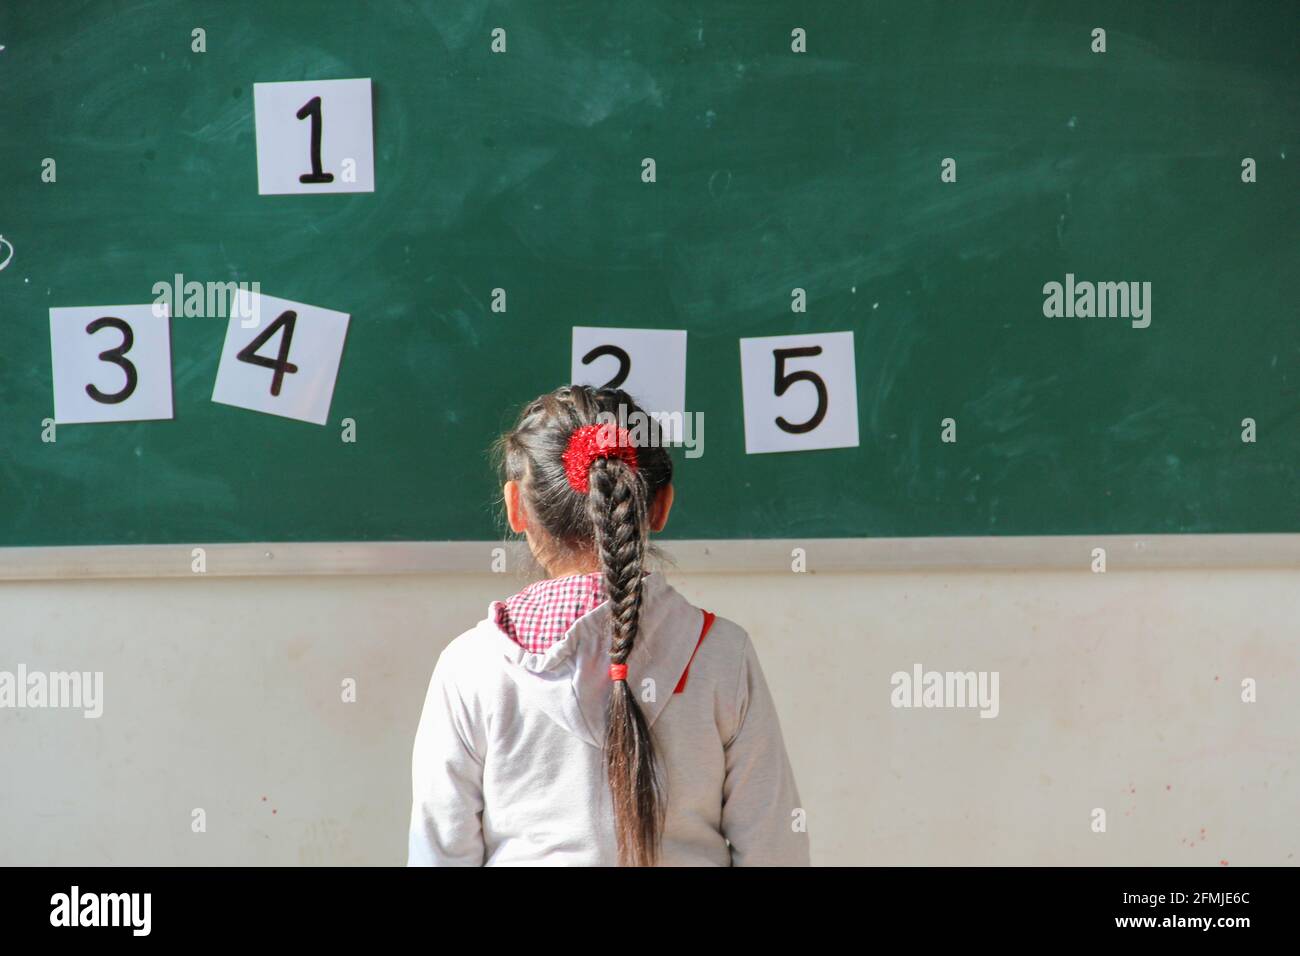 This rural school was destroyed during the 2008 Sichuan earthquake. Sutdent learning English and must choose the correct number. Stock Photo